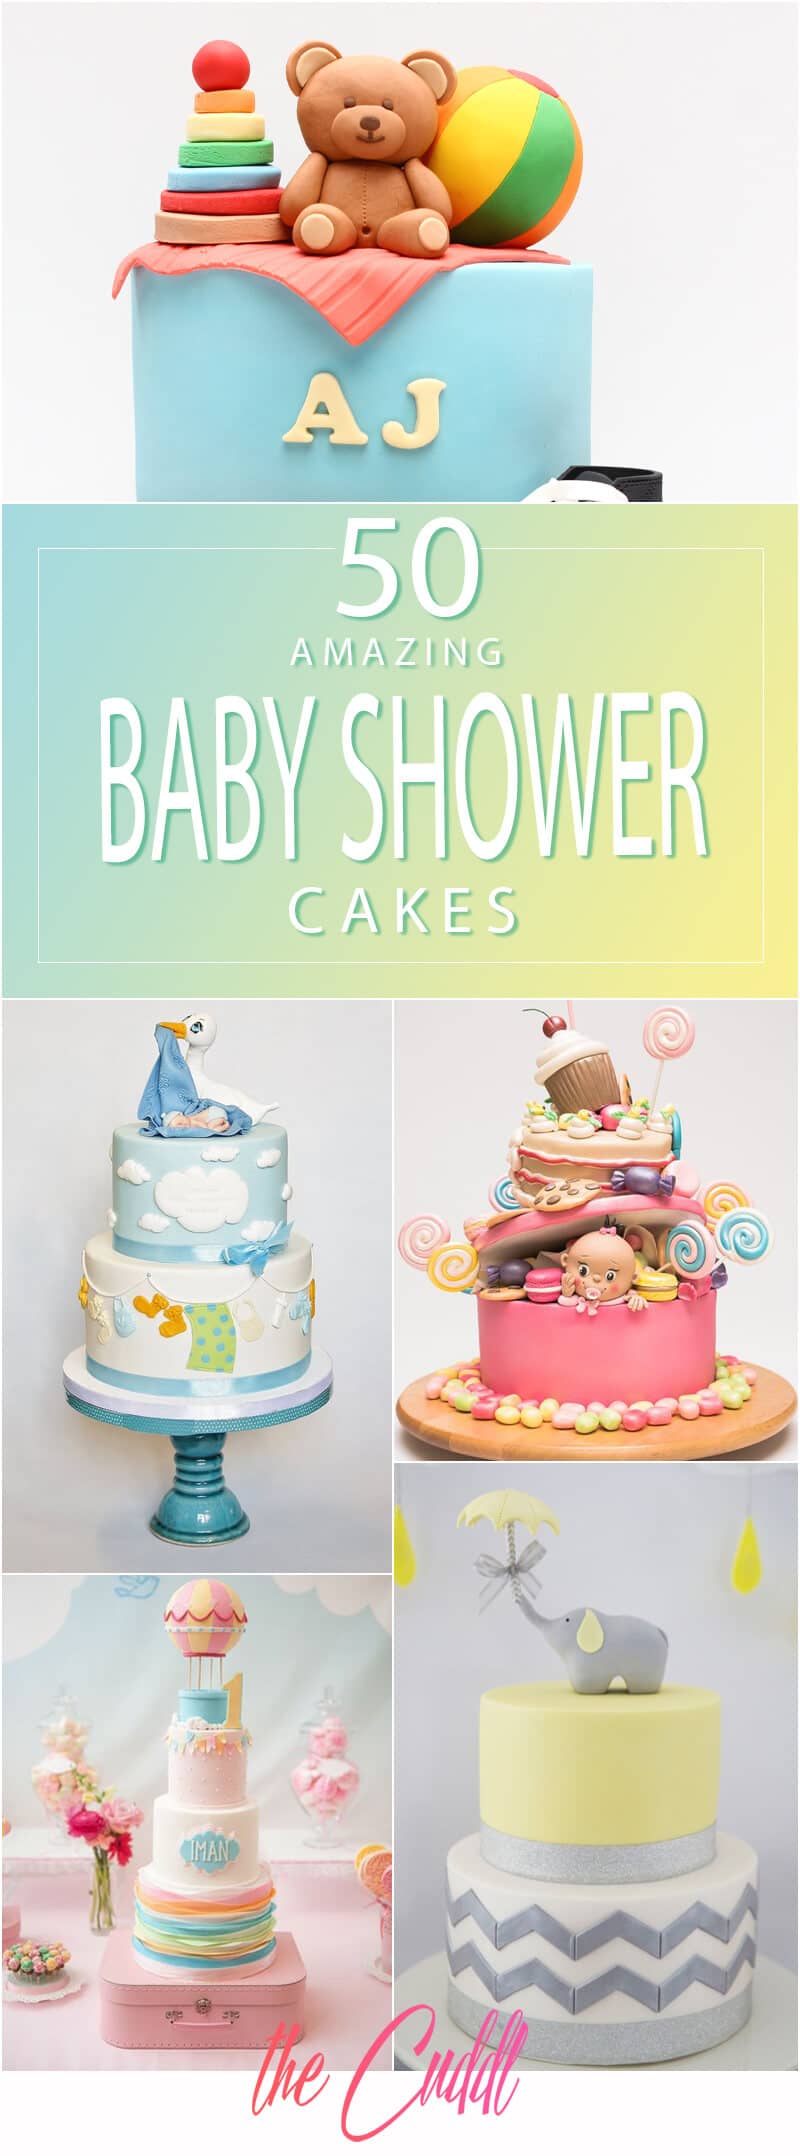 50 Amazing Baby Shower Cakes that Will Inspire You